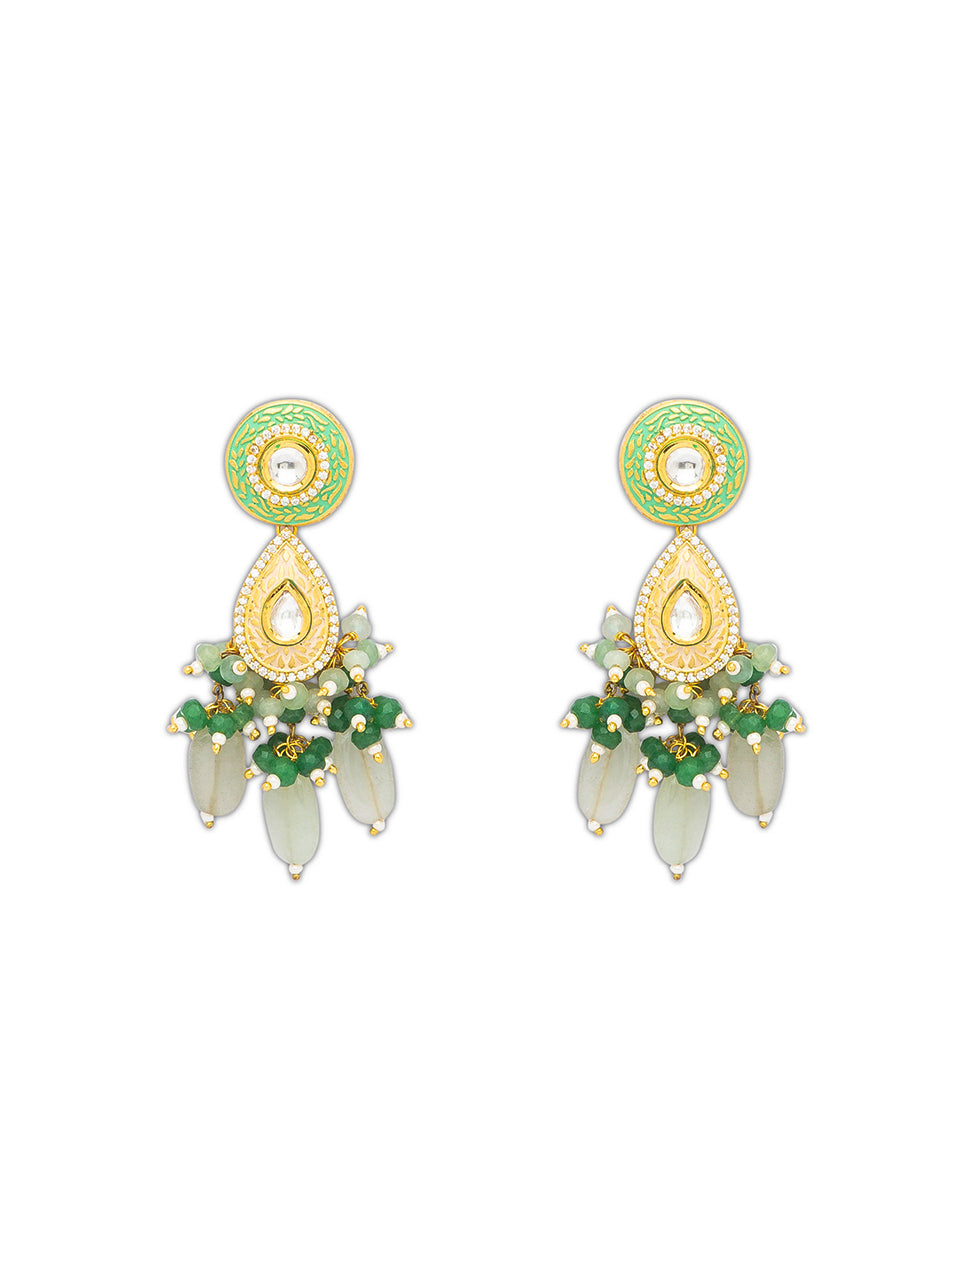 Earring Pair with Gold Polished Brass, Meenakari work Agates & Pearls